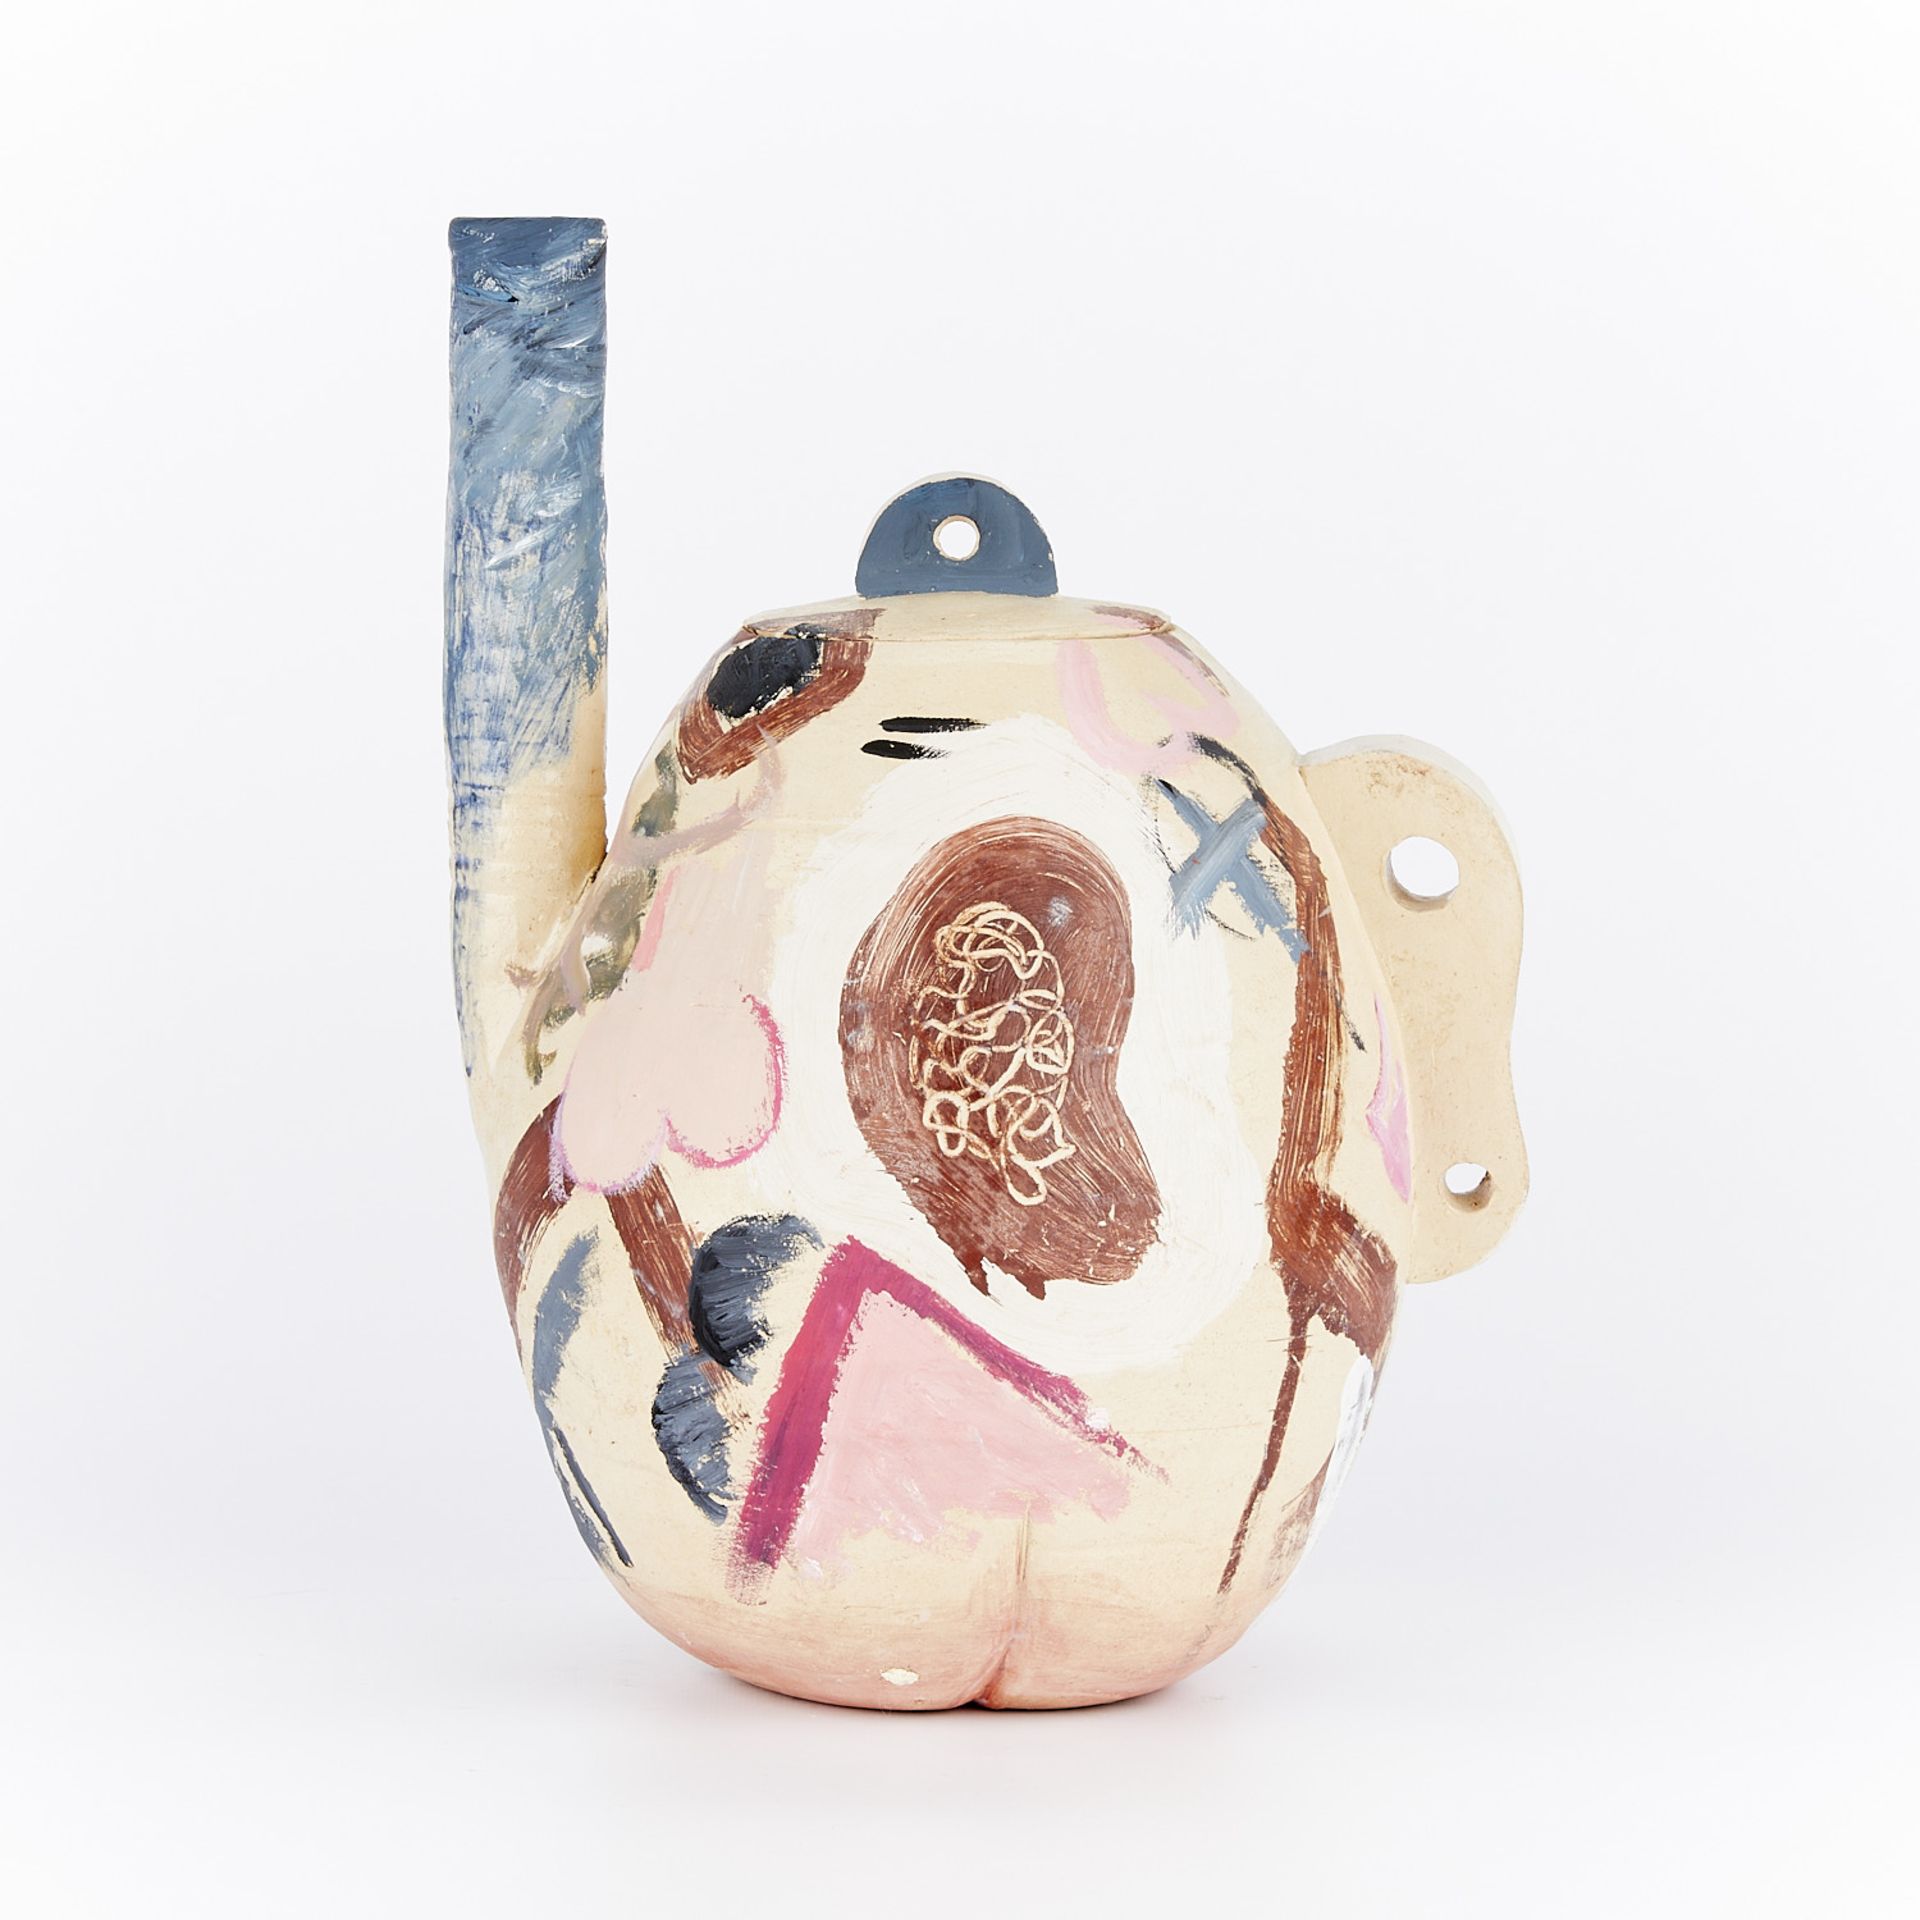 Laure Prouvost "Steaming For You" Painted Ceramic - Image 6 of 12